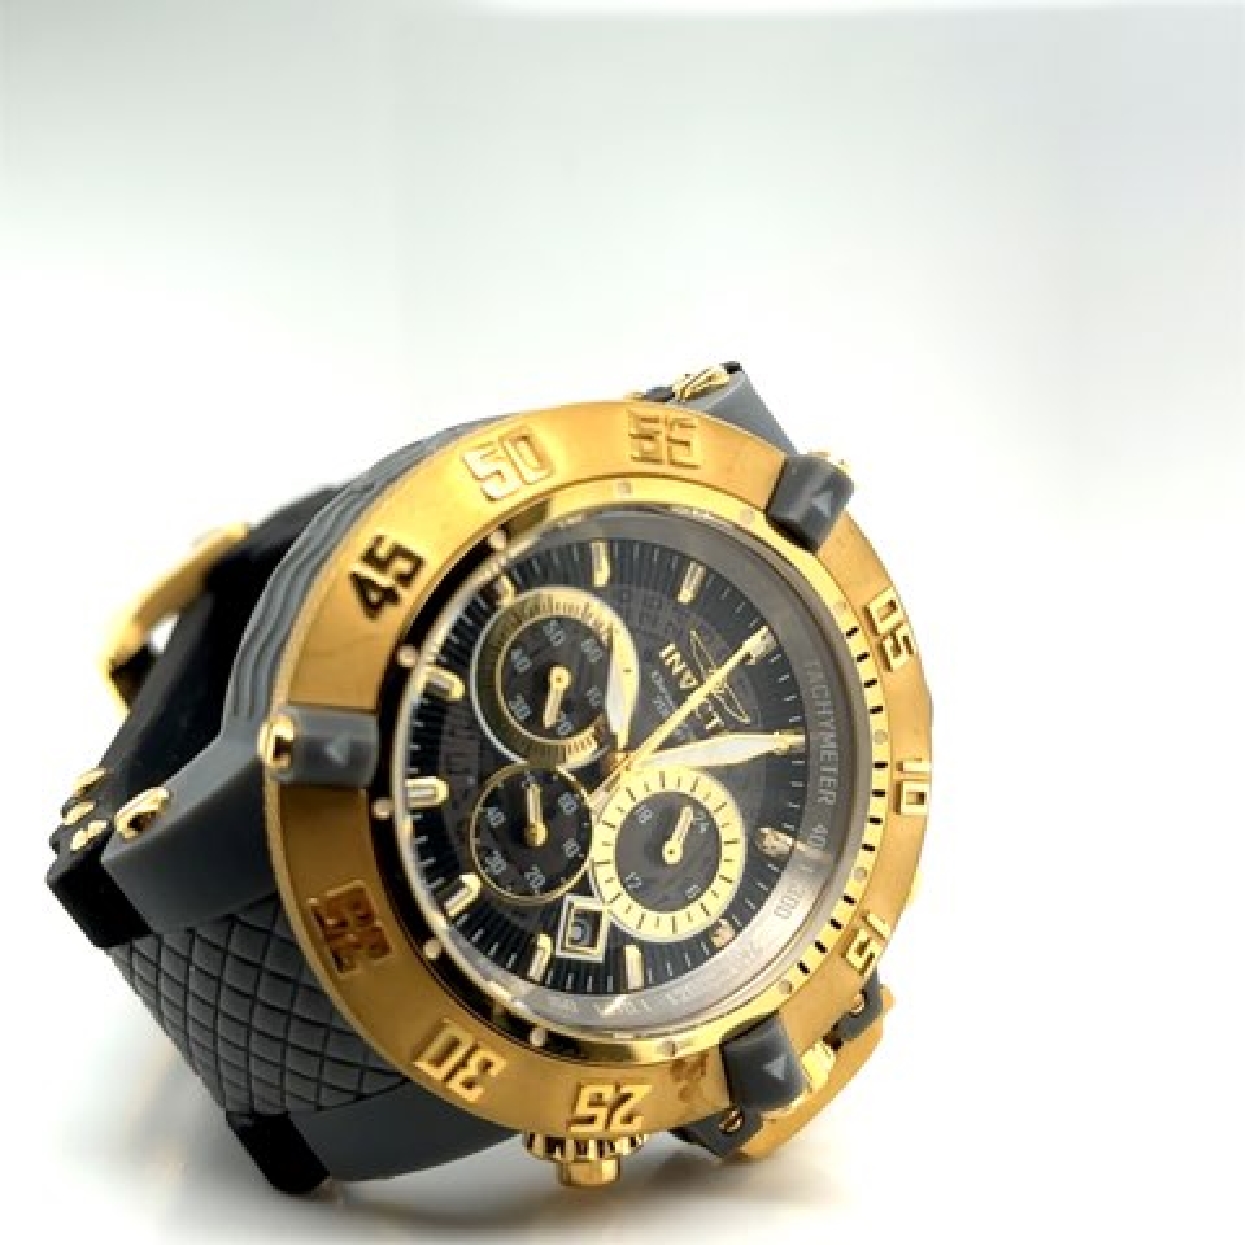 Invicta Stainless Steel Subaqua Noma III Chronograph Men s Watch
Model 0930 
50mm 
200m Water Resistance 